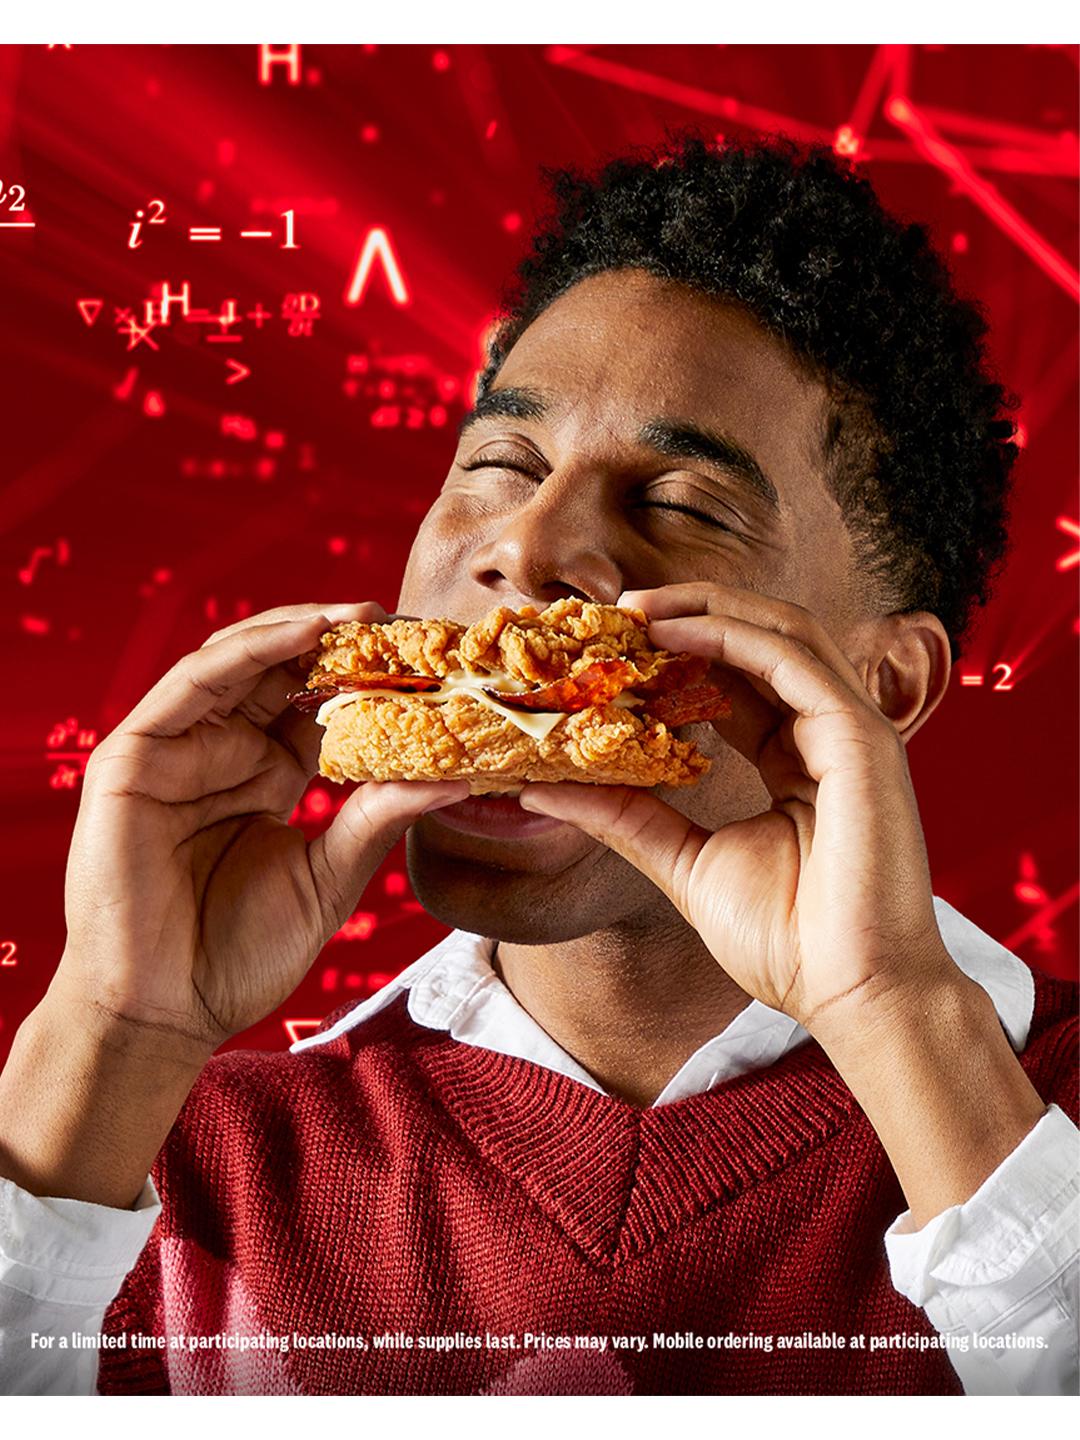 guy biting into double down sandwich